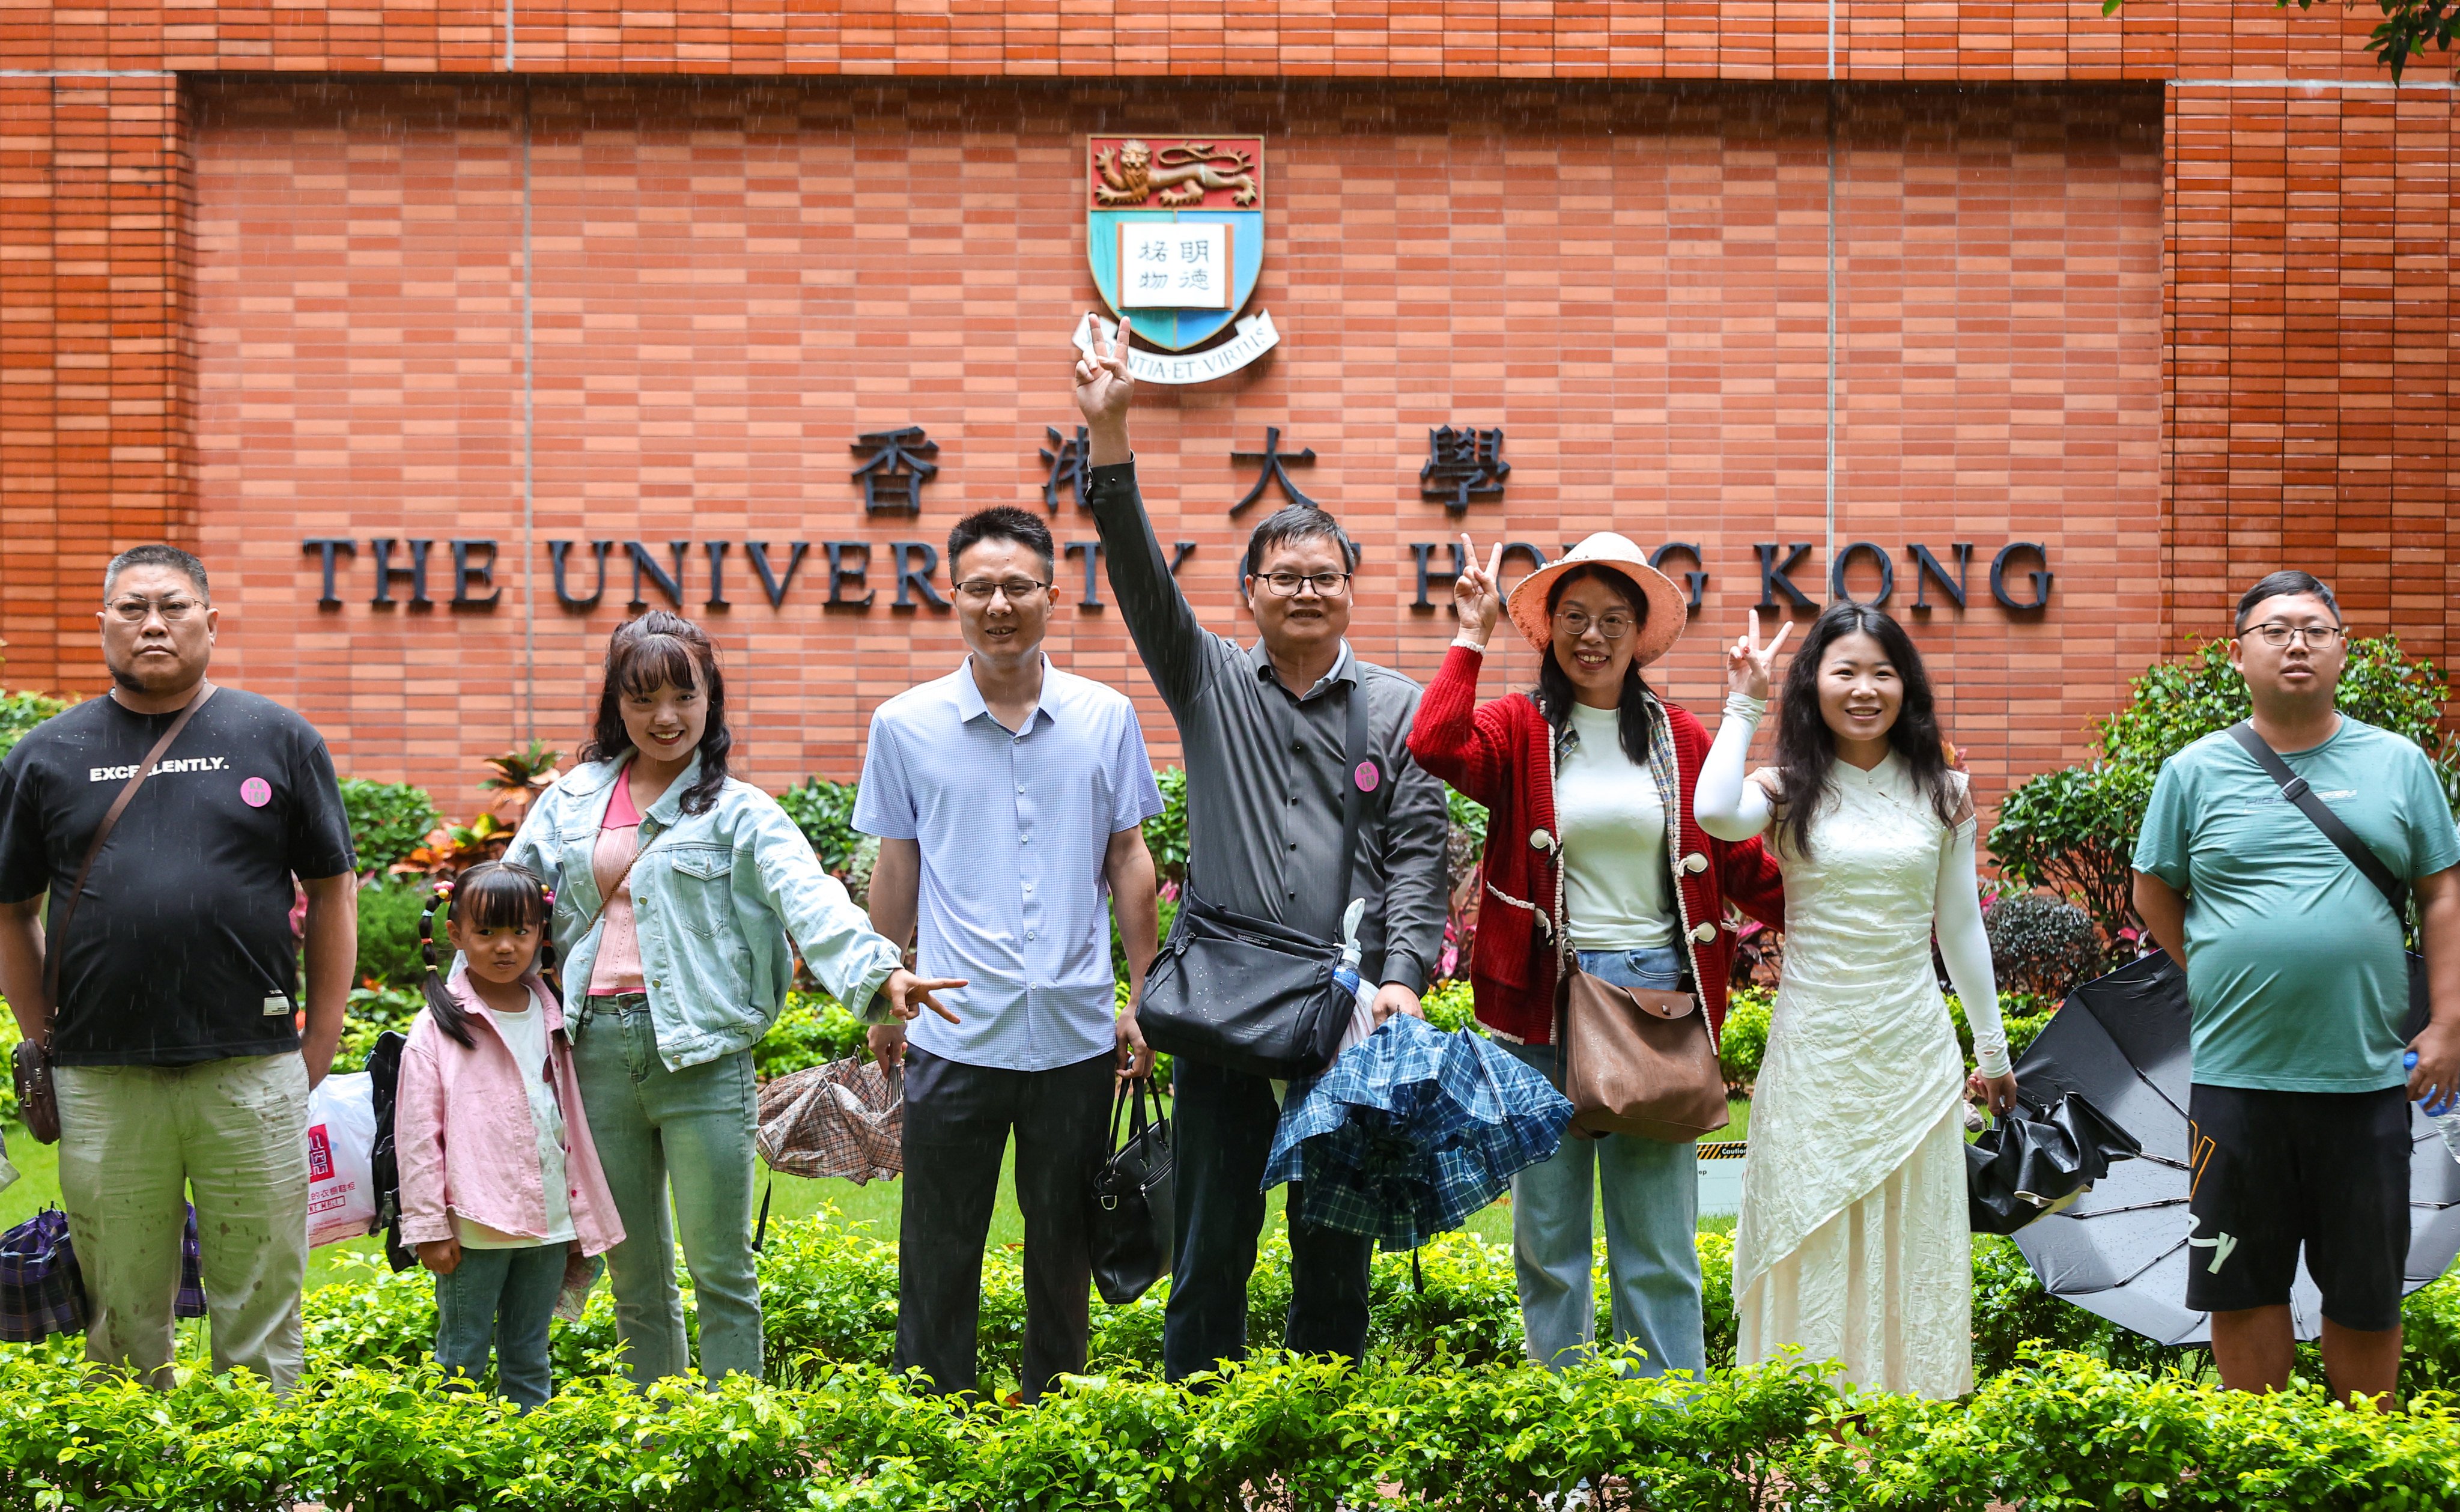 Travellers visit University of Hong Kong on Labour Day “golden week” holiday. Photo: Edmond So